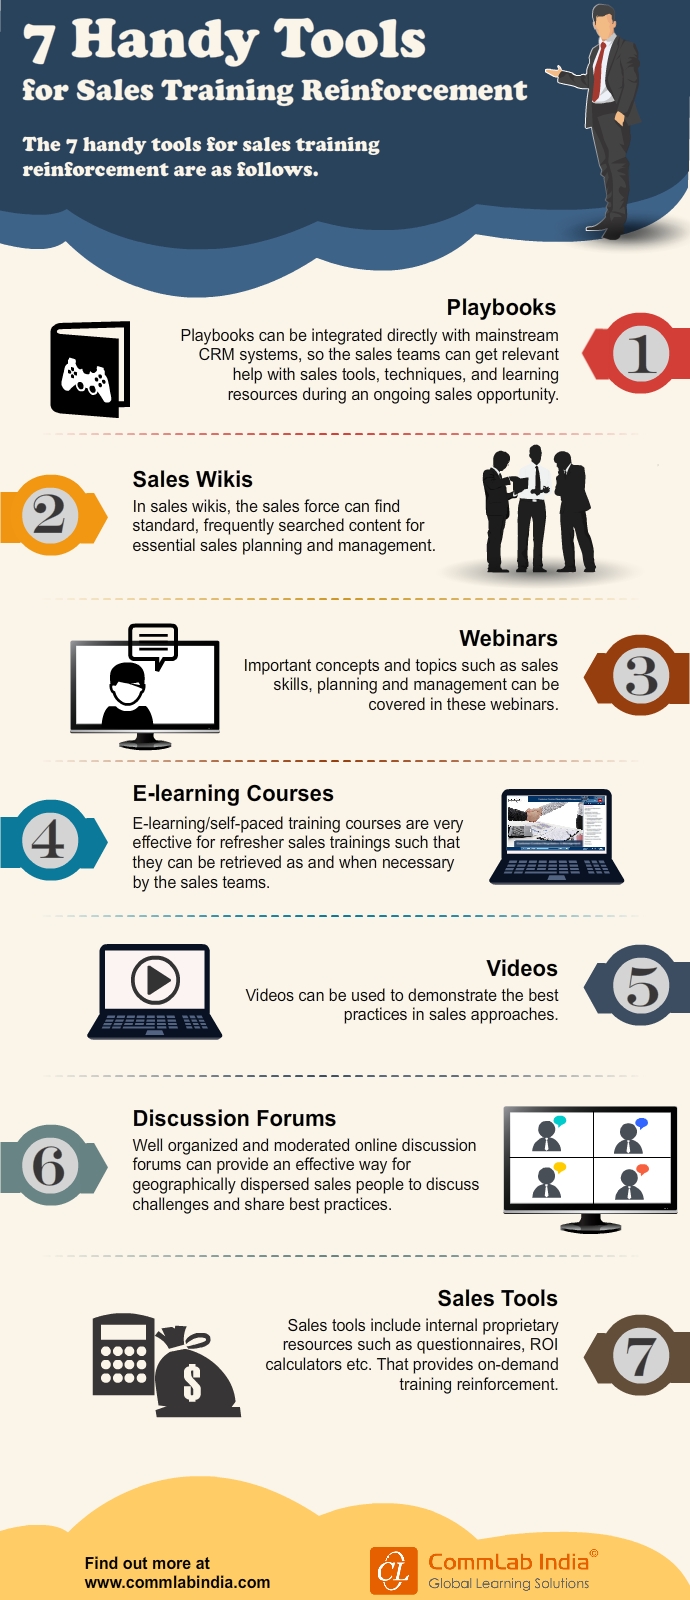 7 Handy Tools for Sales Training Reinforcement [Infographic]